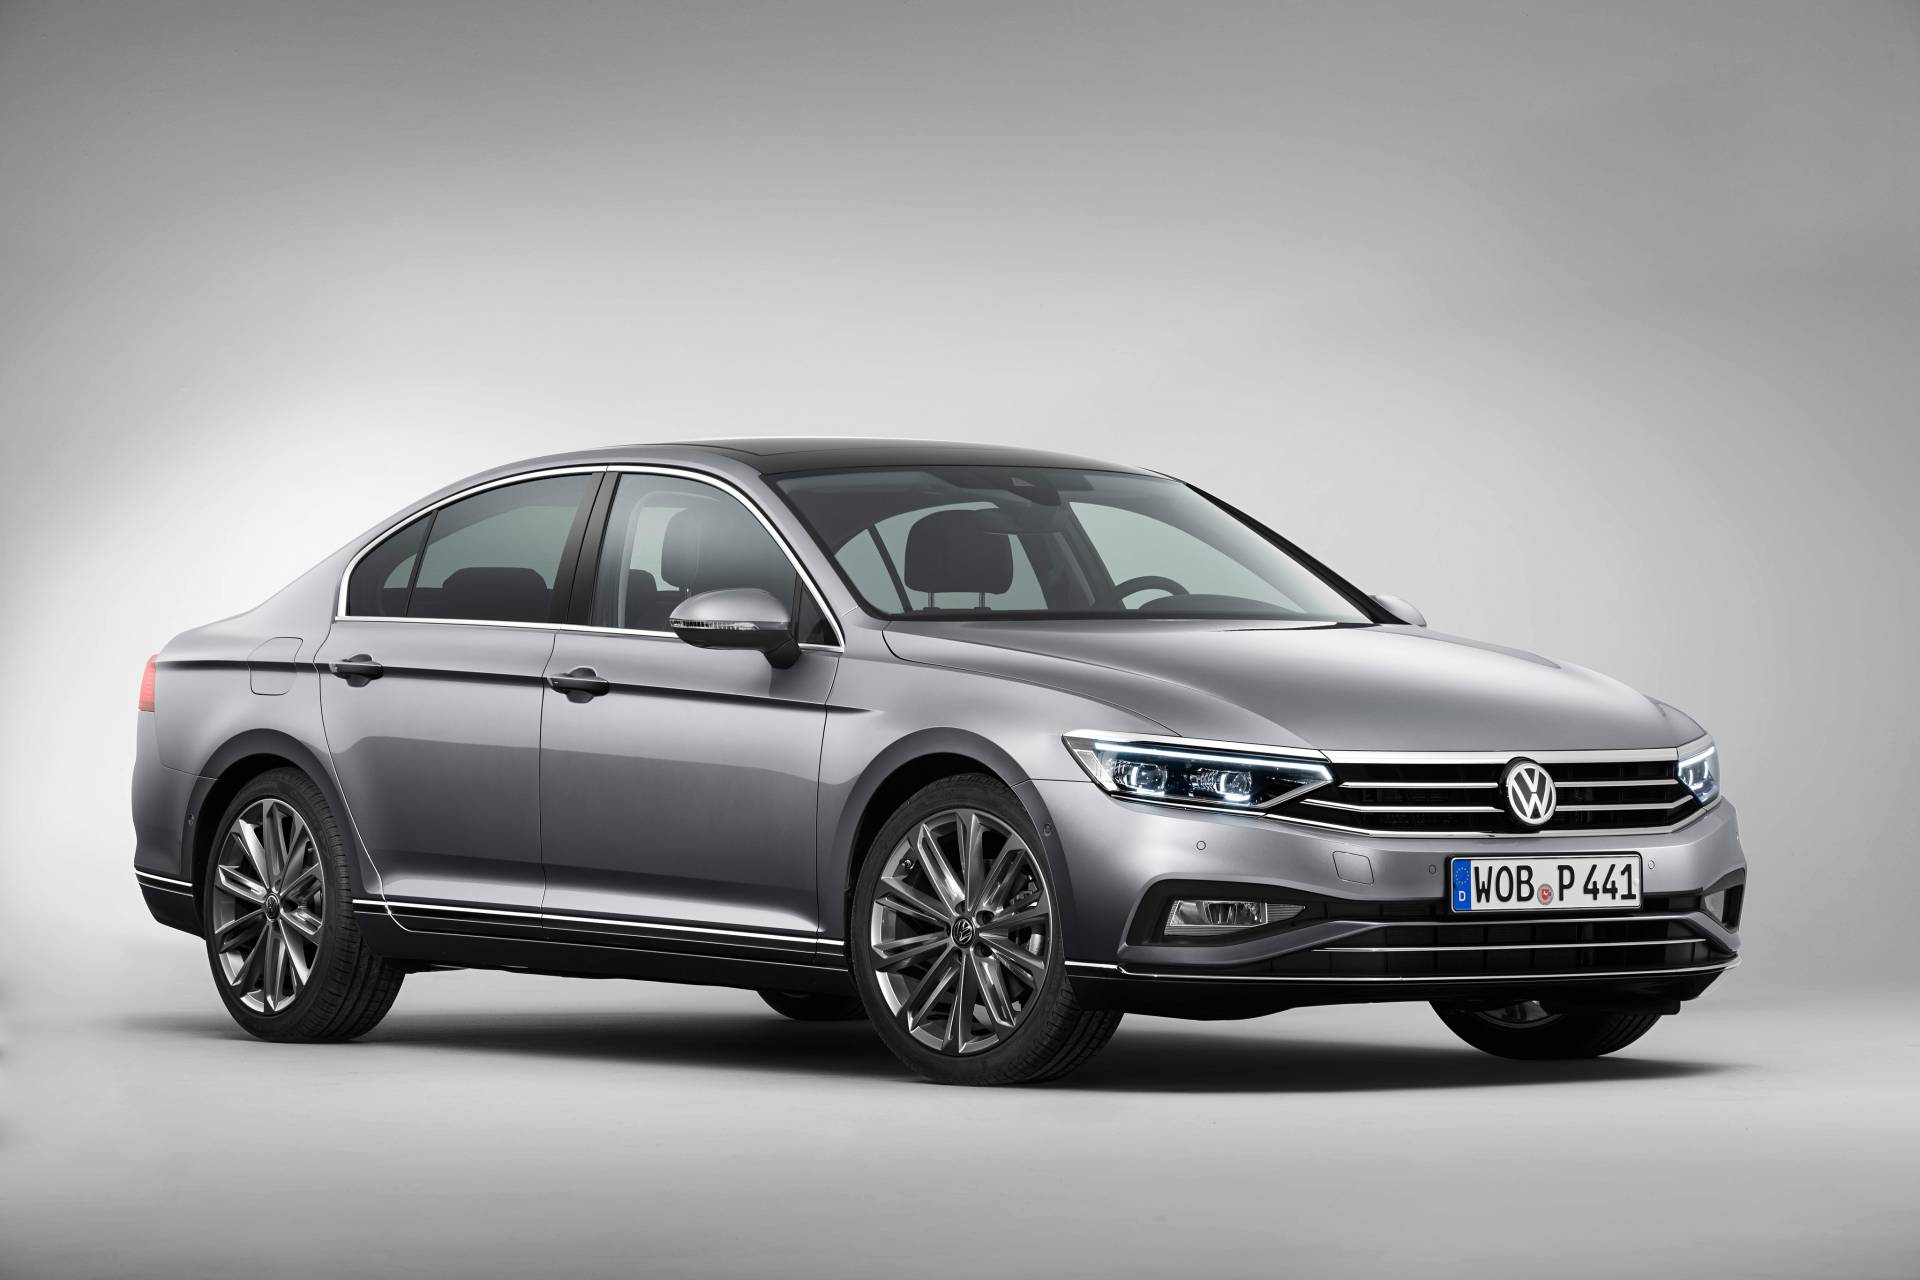 2020 VW Passat Pre-Sales Begin In Europe, Prices Announced | Carscoops